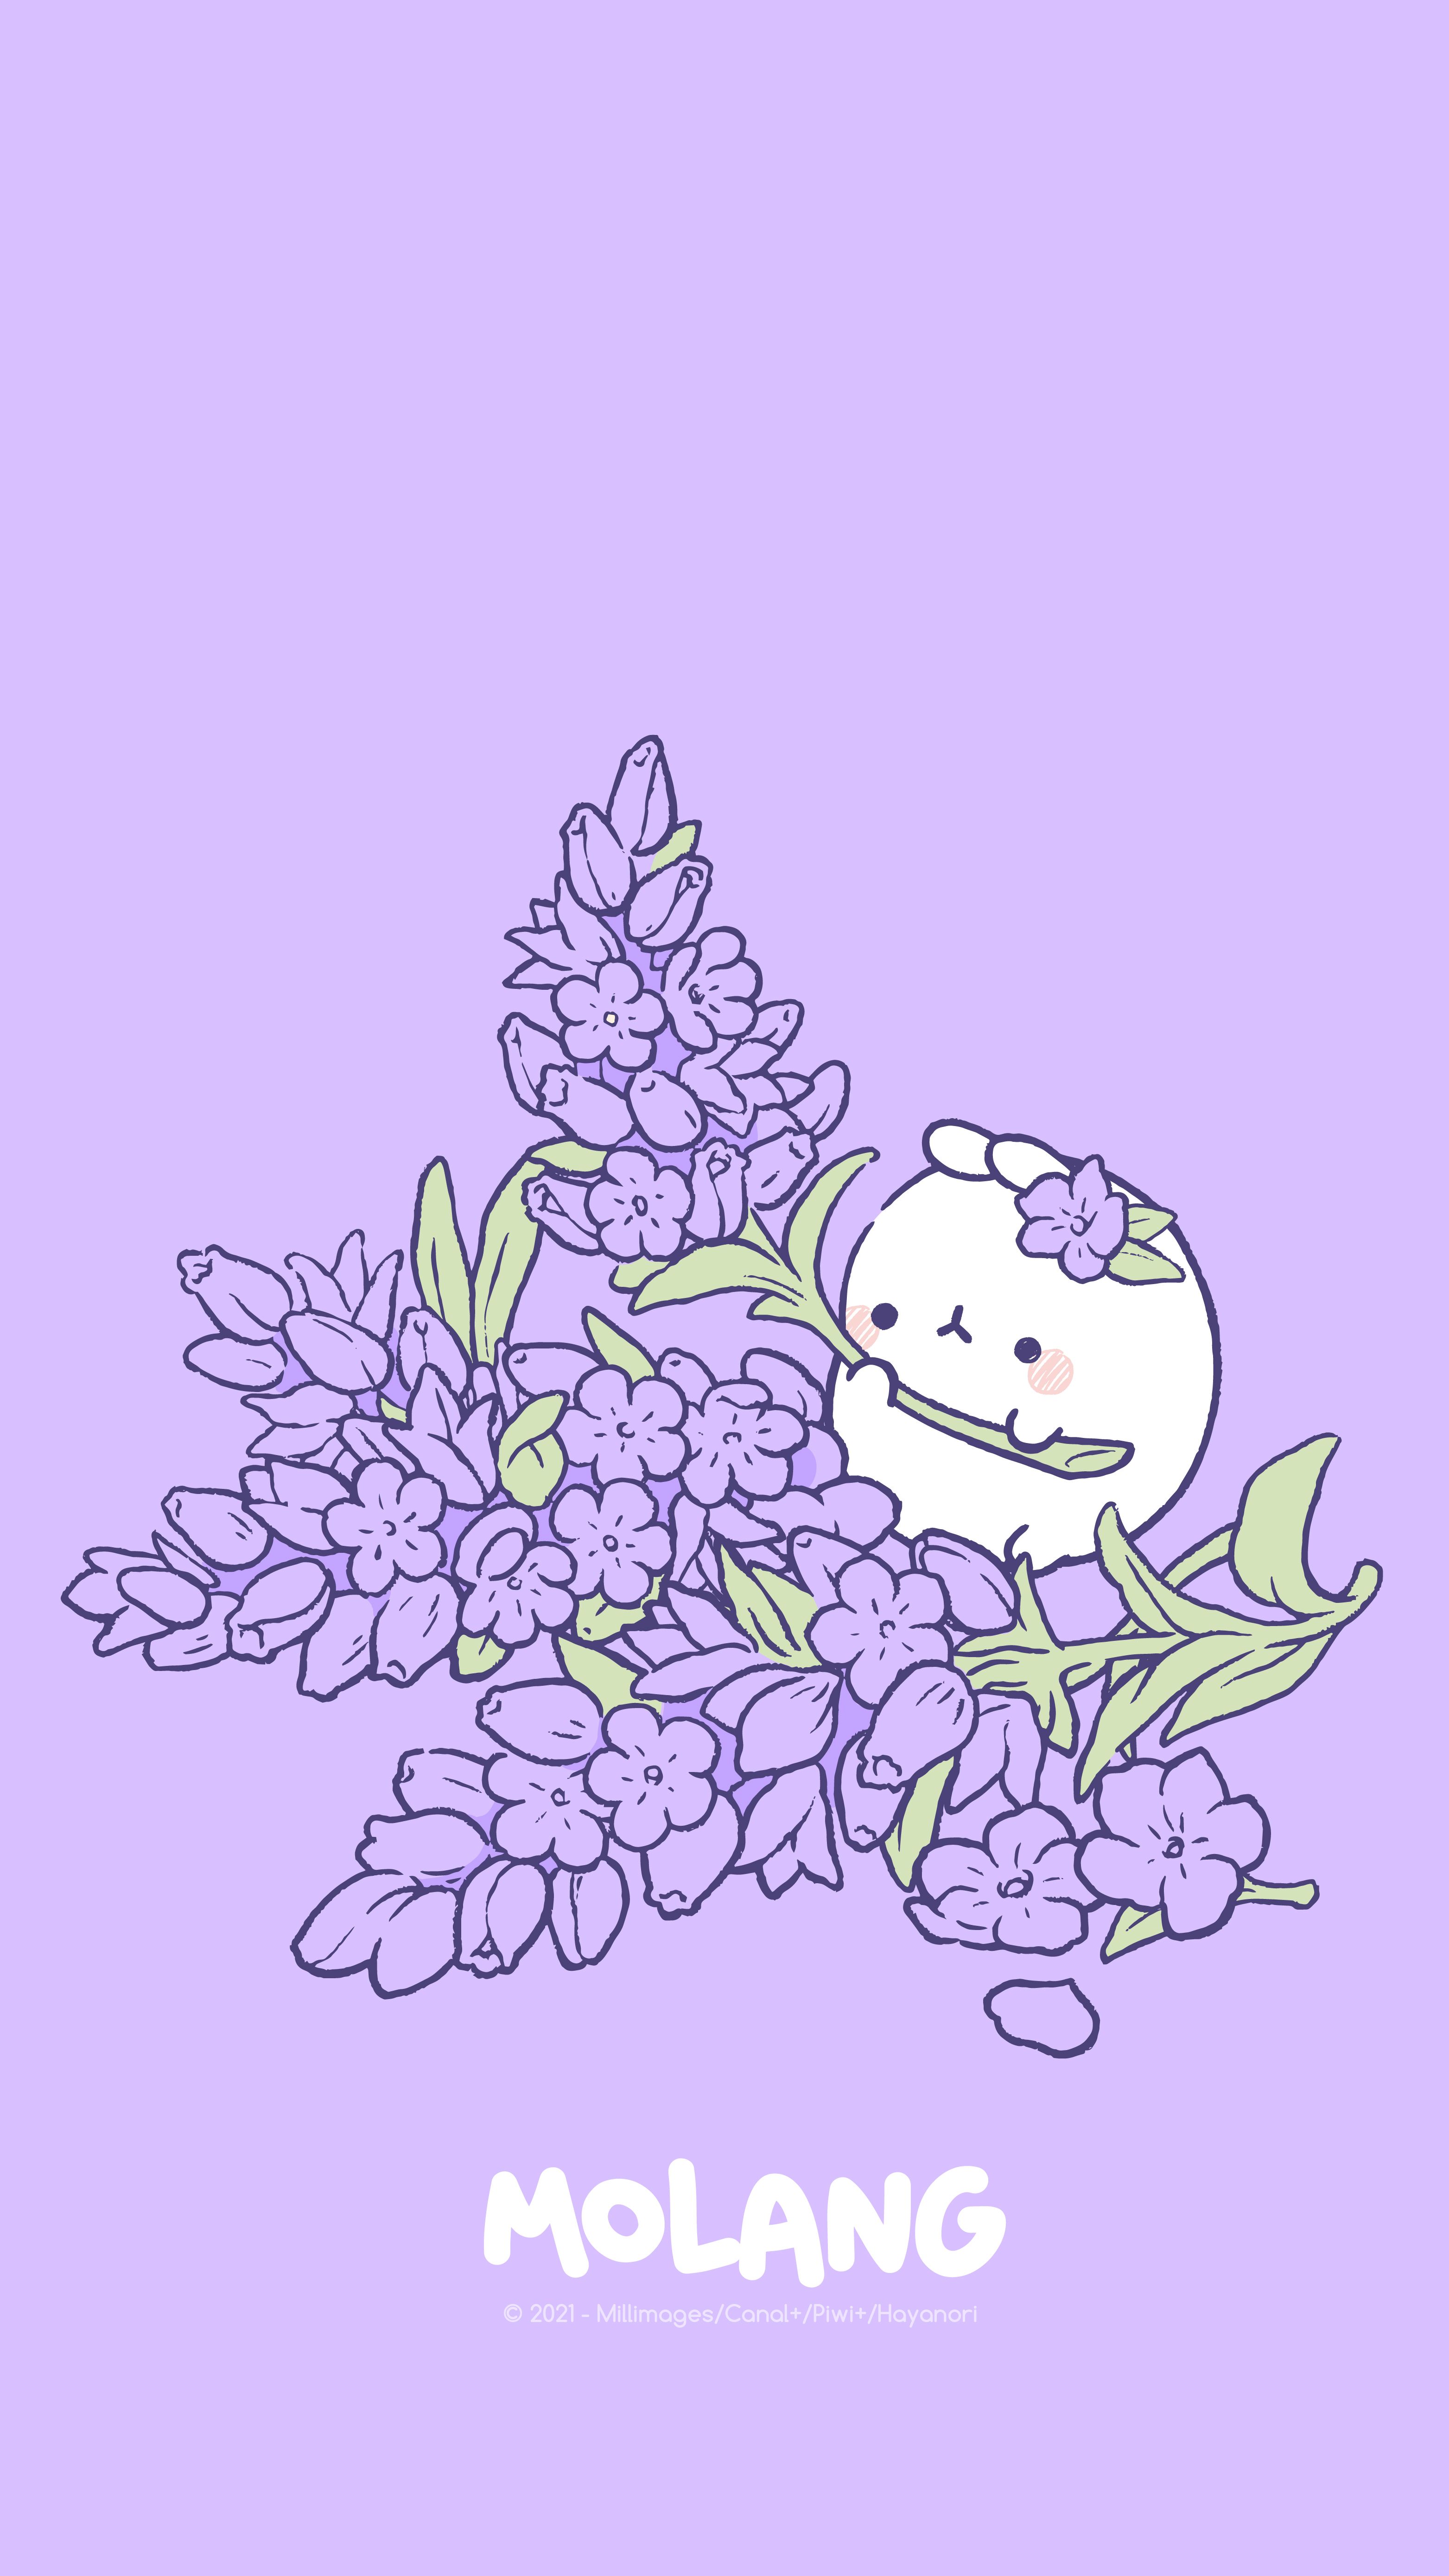 The image of a cute cat with flowers on it - Molang